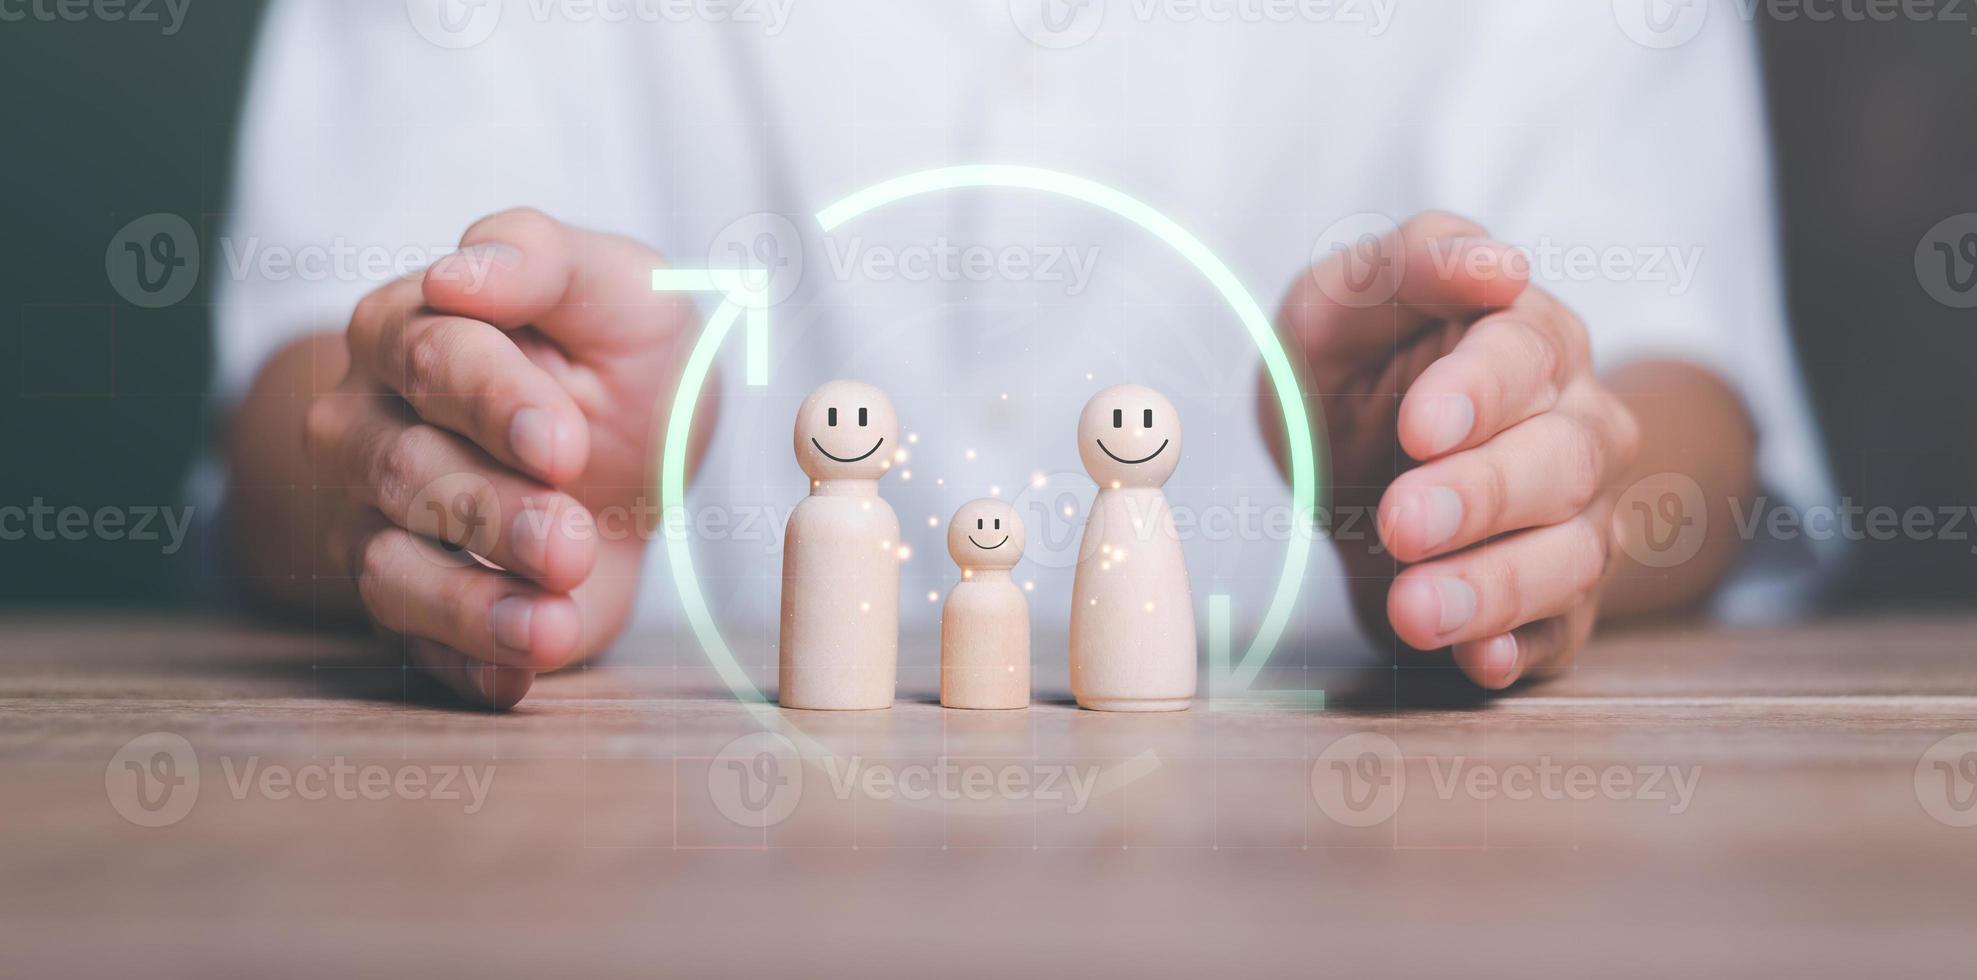 wooden dolls and icons represents the protection and protection of safety,concept of insurance management planning To ensure both health and financial safety,Property and Family Risk Reduction photo